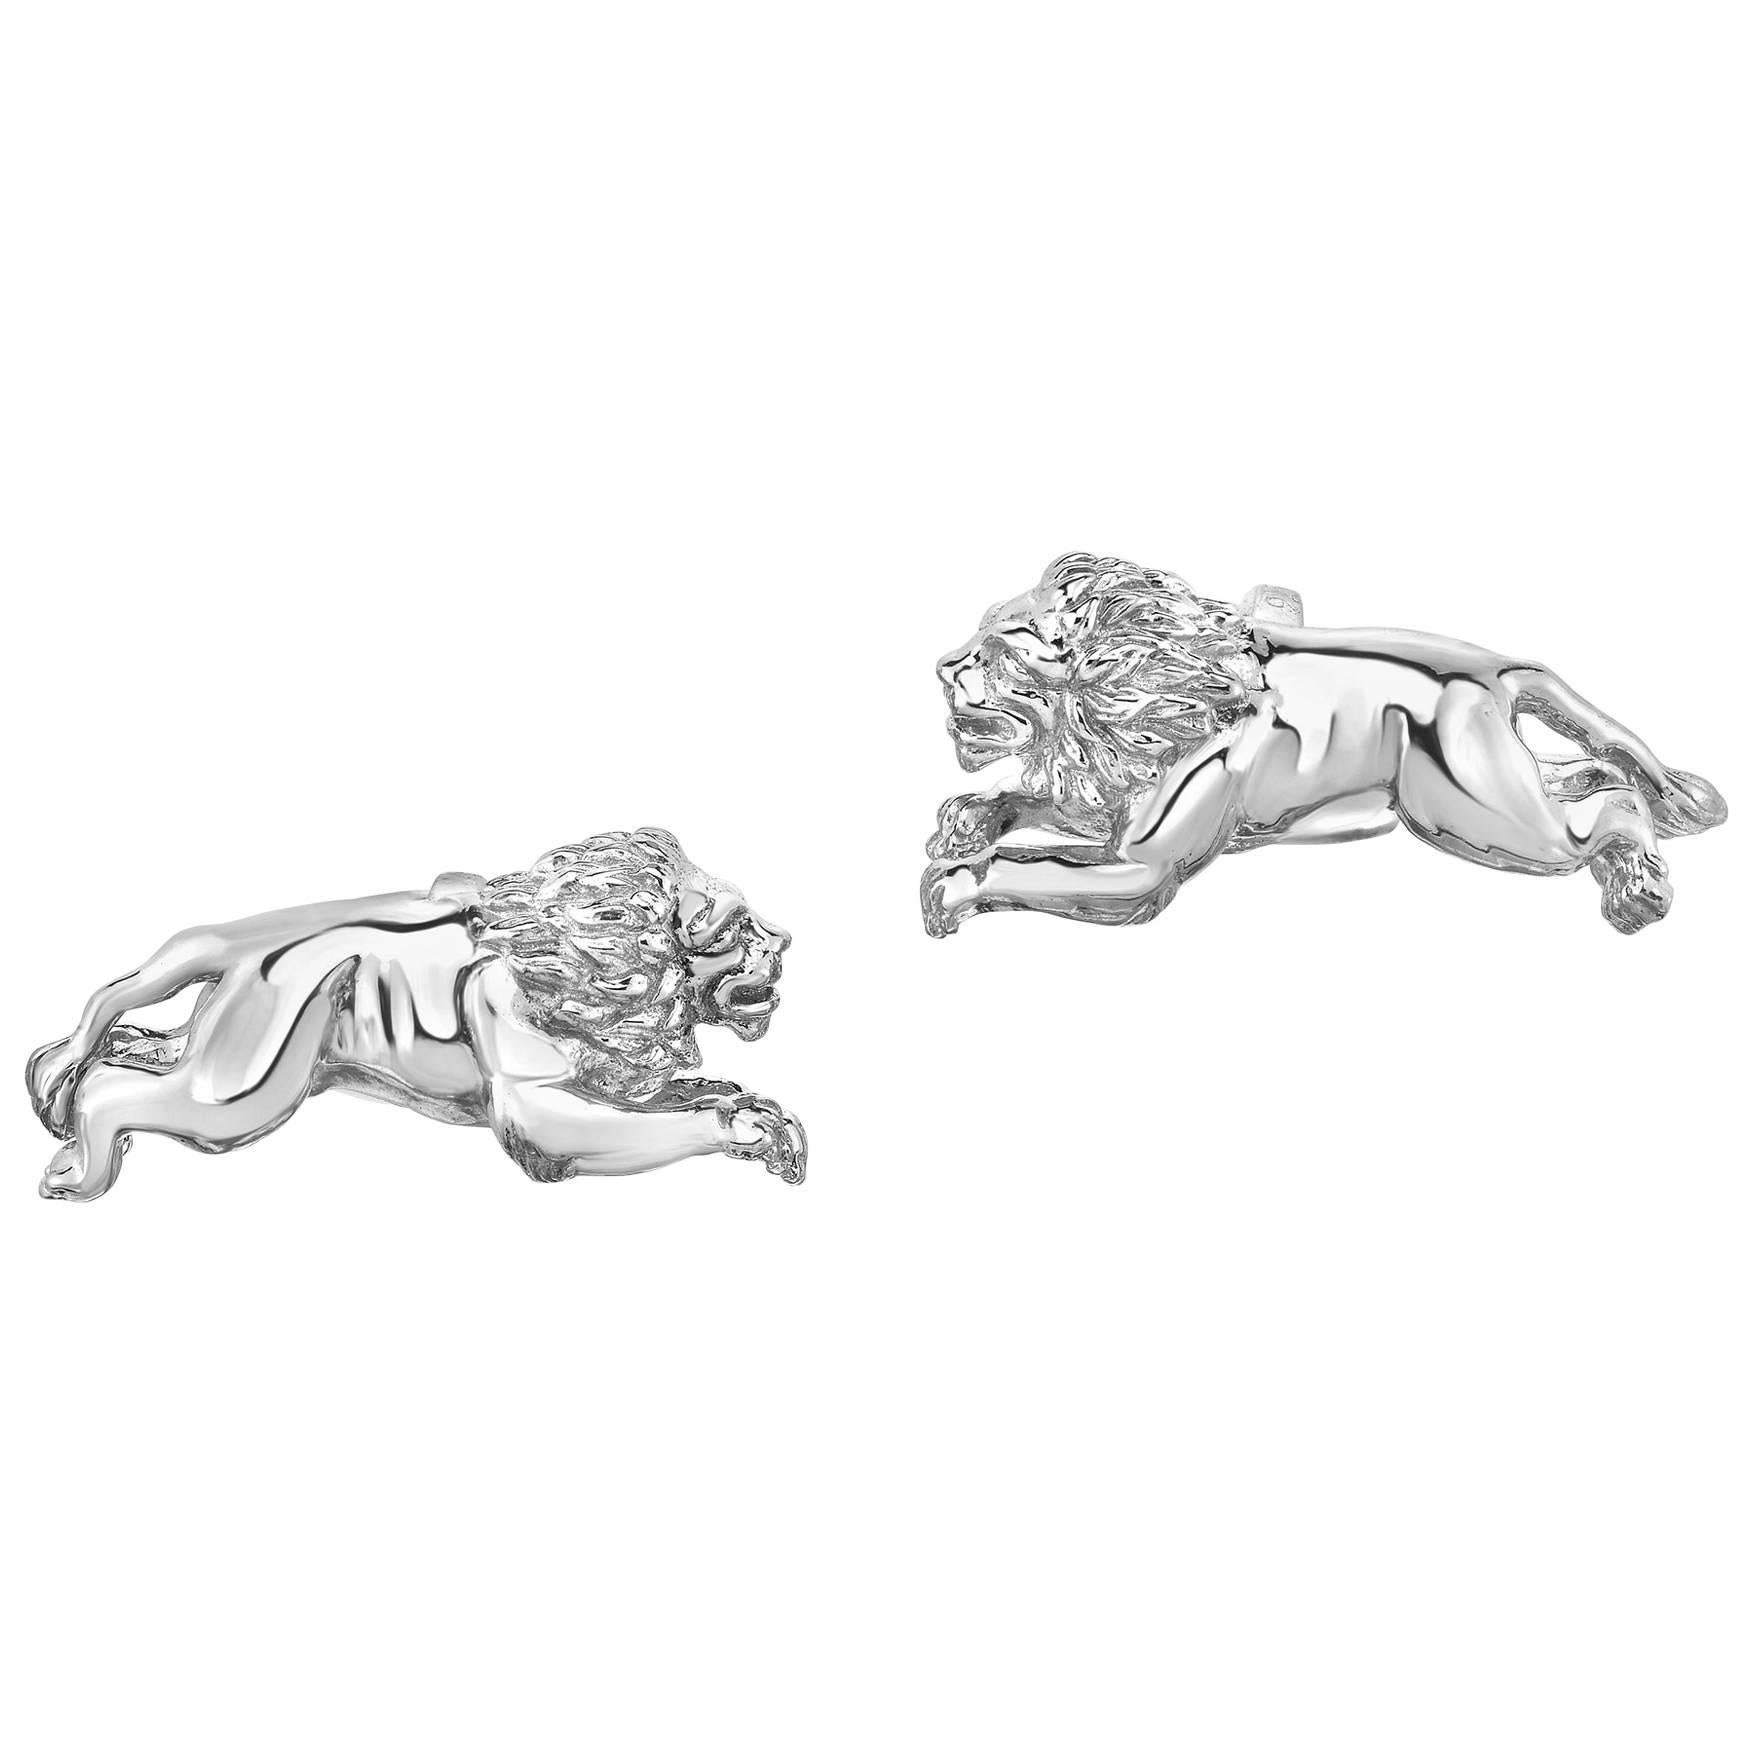 Marisa Perry's Sterling Silver Diamond Lion Cufflinks For Sale